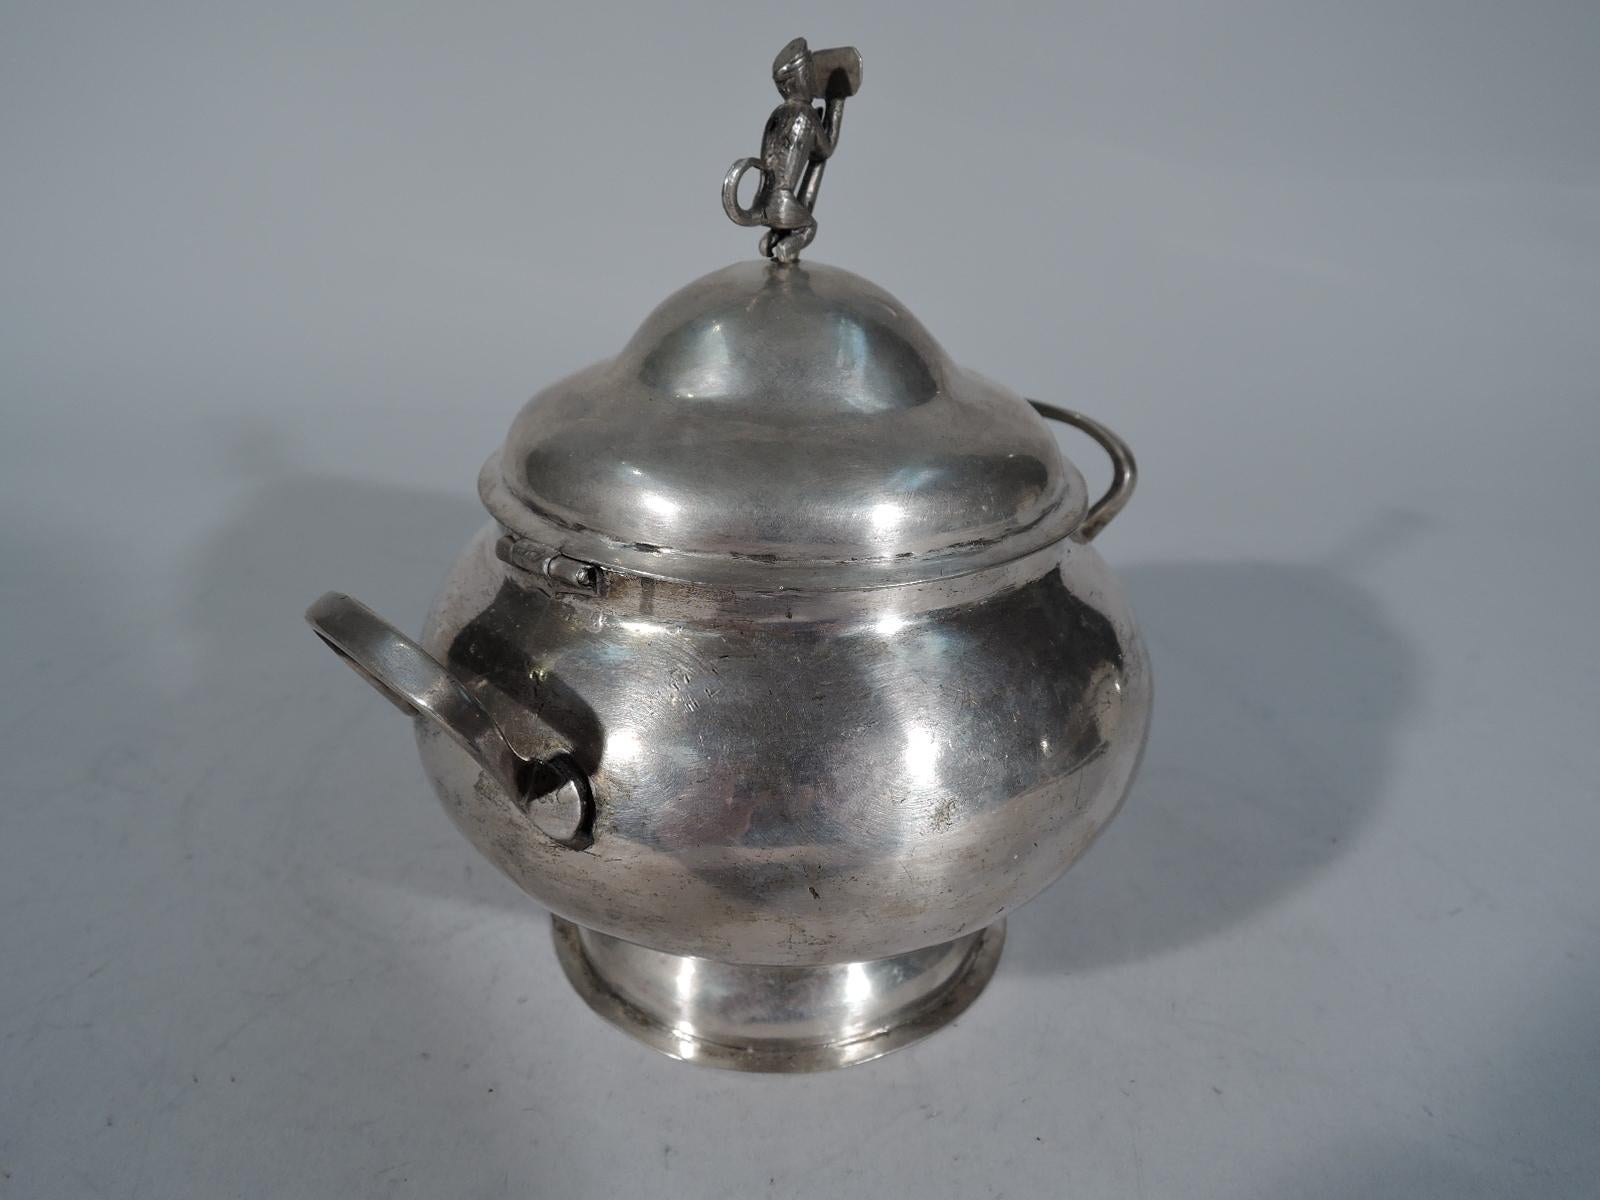 South American silver sugar bowl, late 19th century. Bellied with scroll-bracket end handles, domed foot, and hinged double-domed cover with figural finial in form of crouching monkey leaning against a sign post engraved with initials DB. Hand